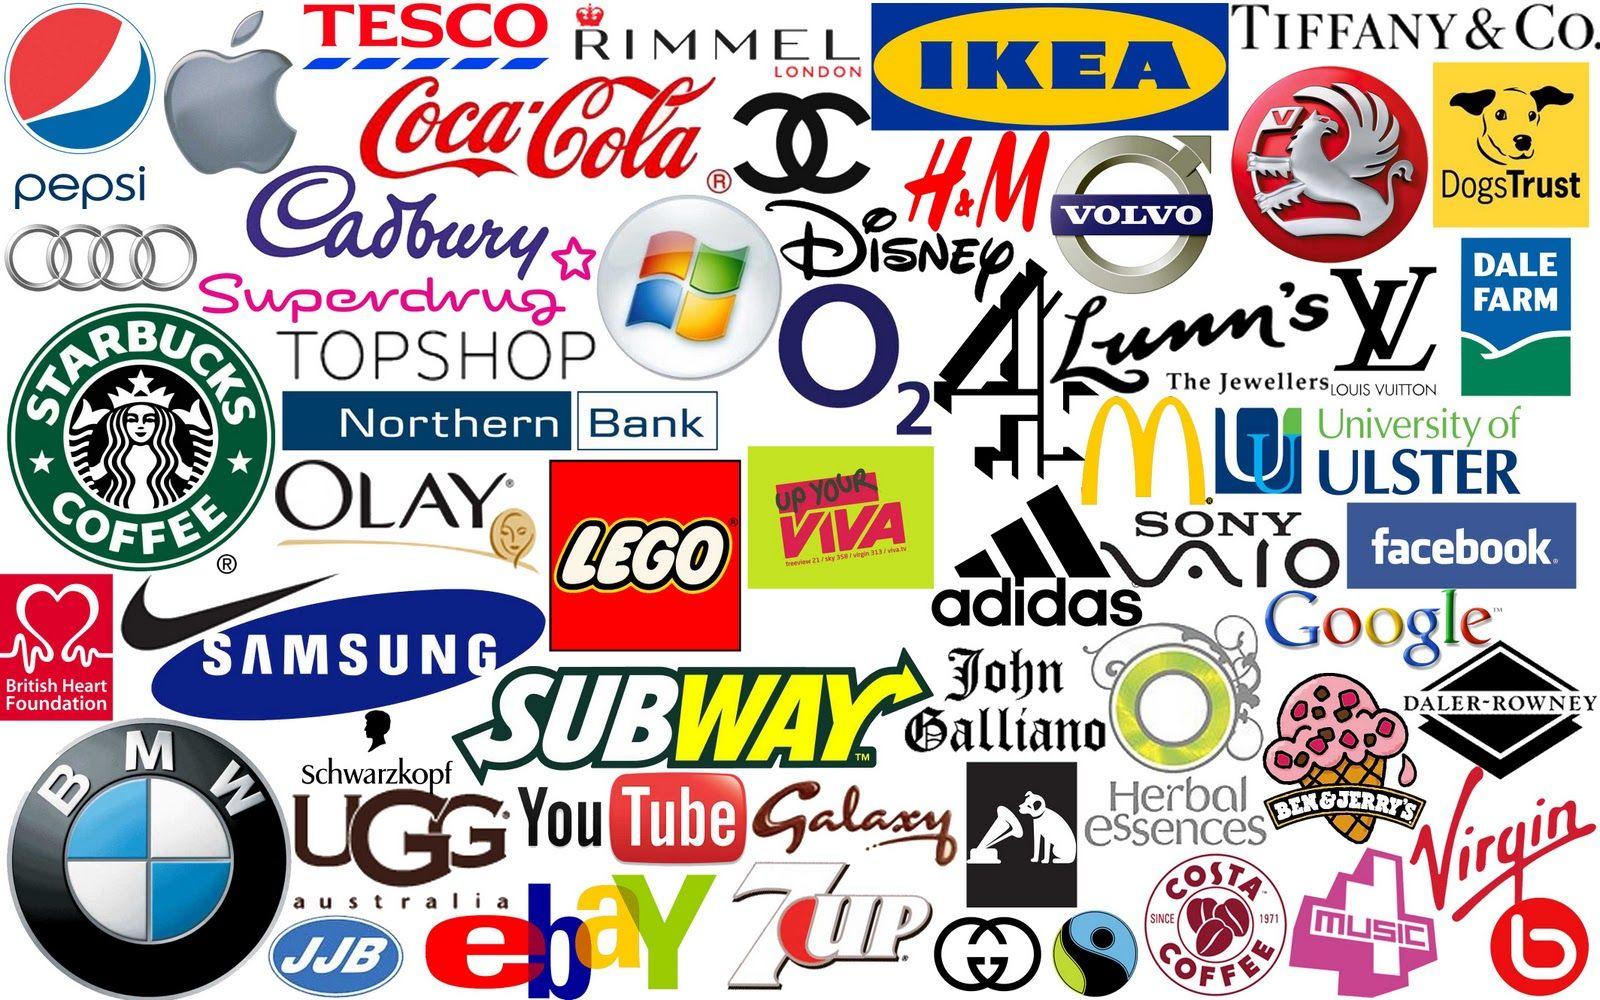 Most Well Known Company Logo - List of Synonyms and Antonyms of the Word: most famous company logos